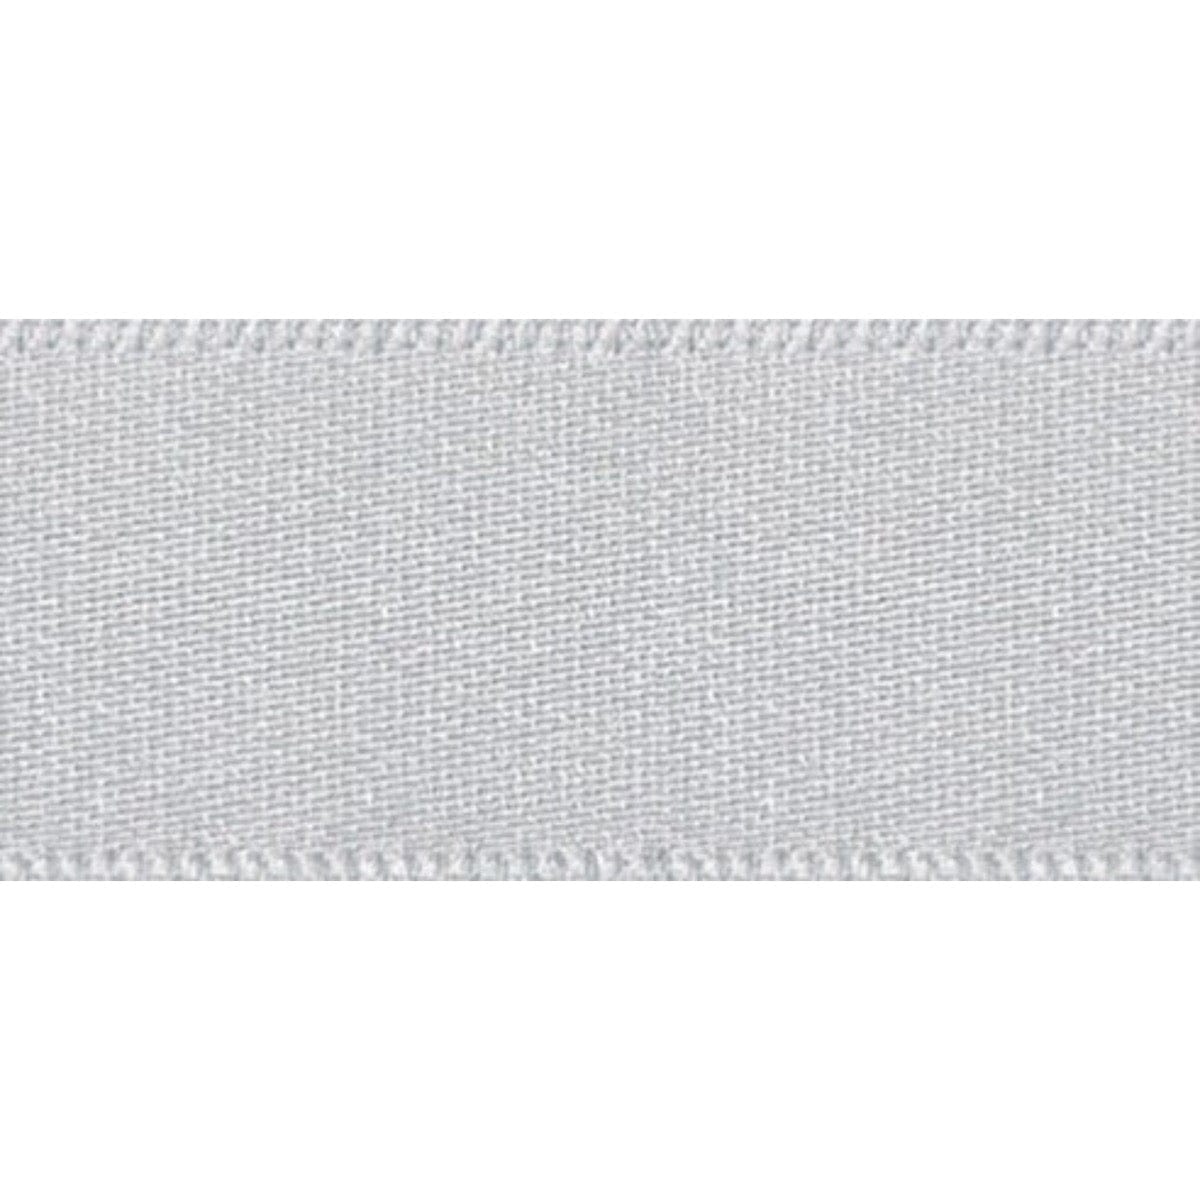 Double Faced Satin Ribbon Silver Grey: 10mm Wide. Price per metre.